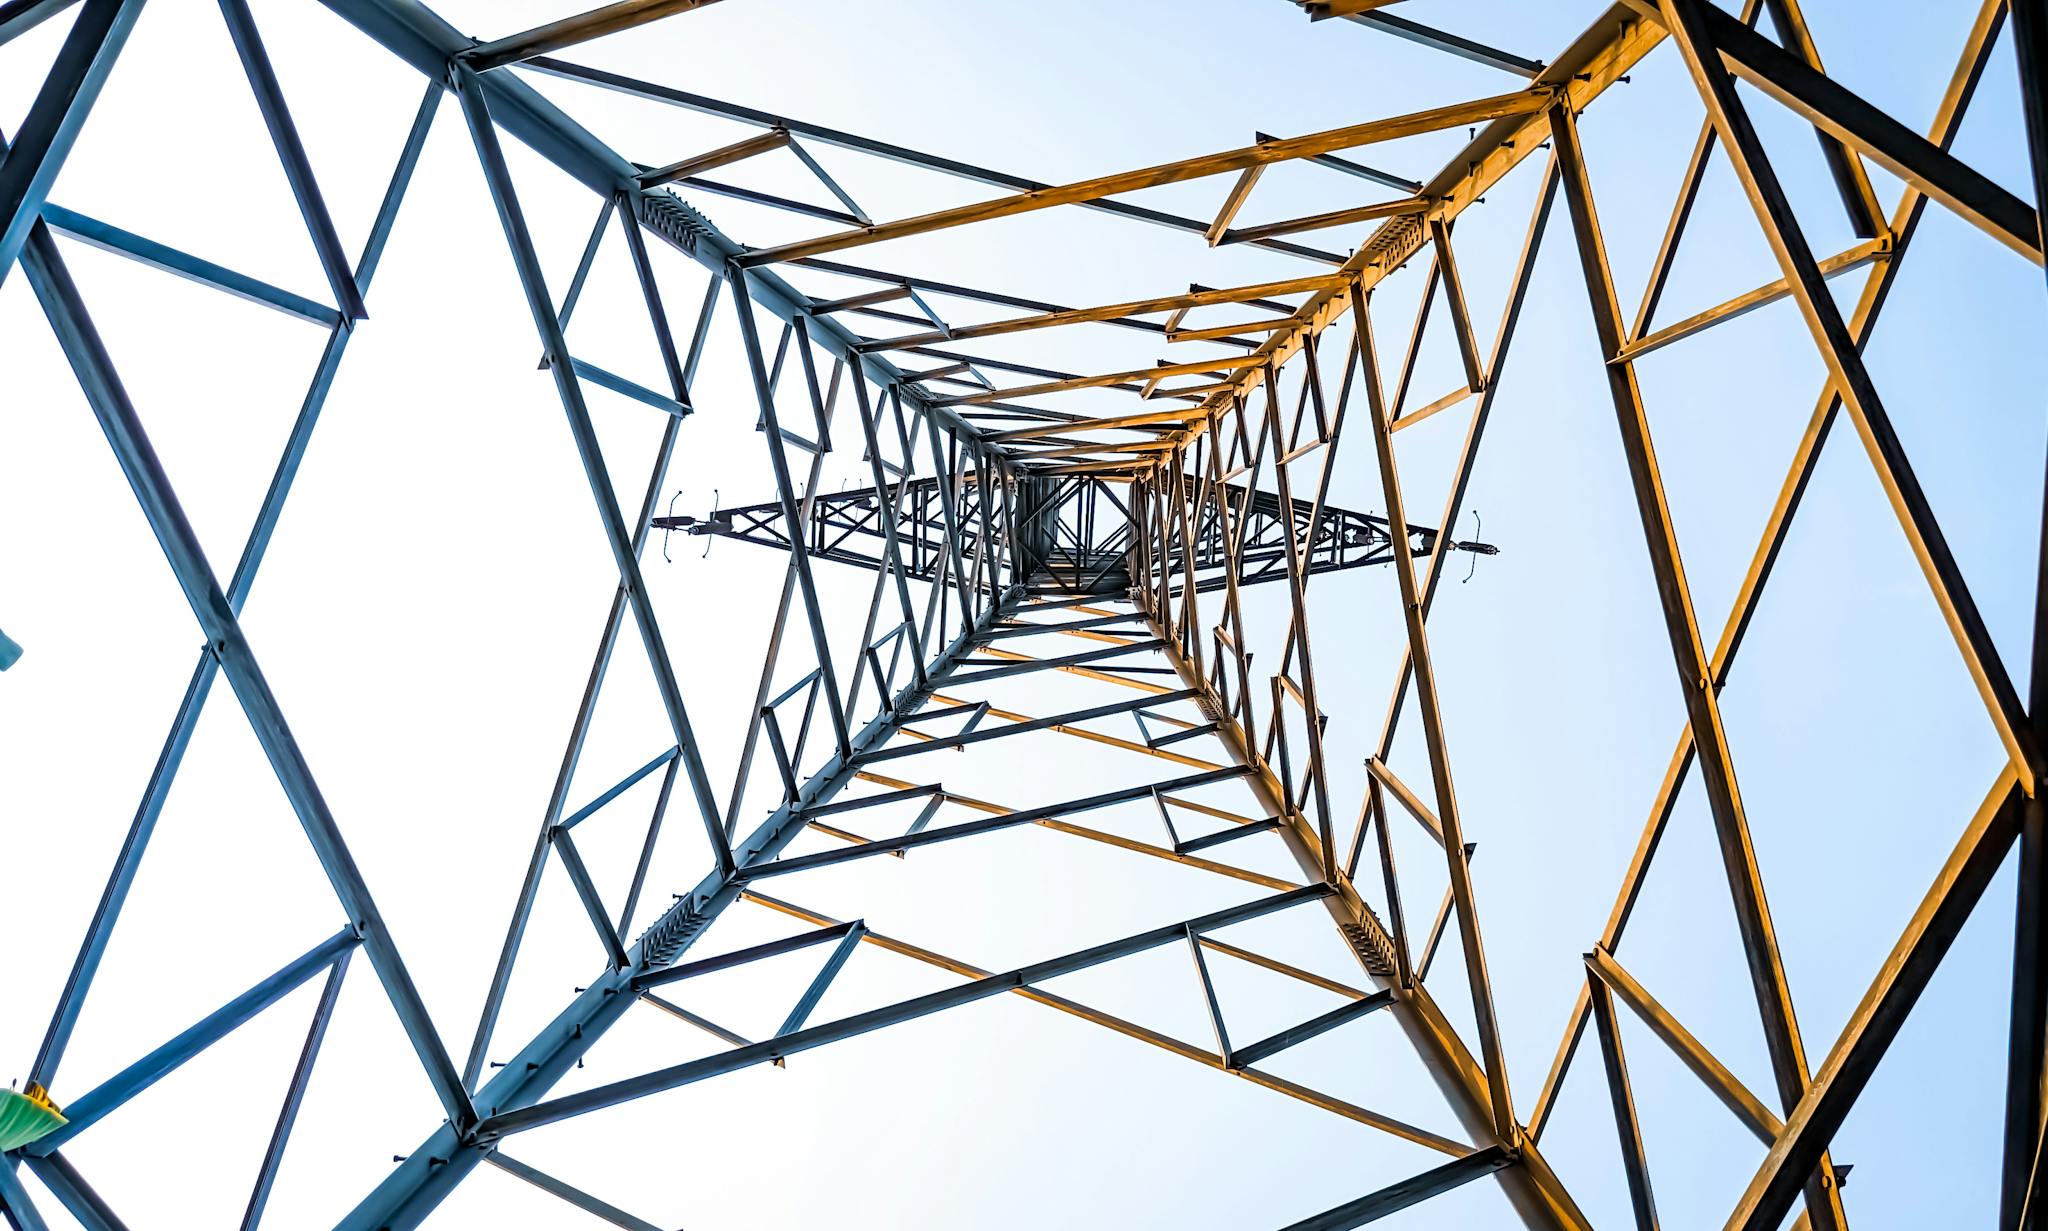 The structure of the high-voltage power pylon viewed from below.